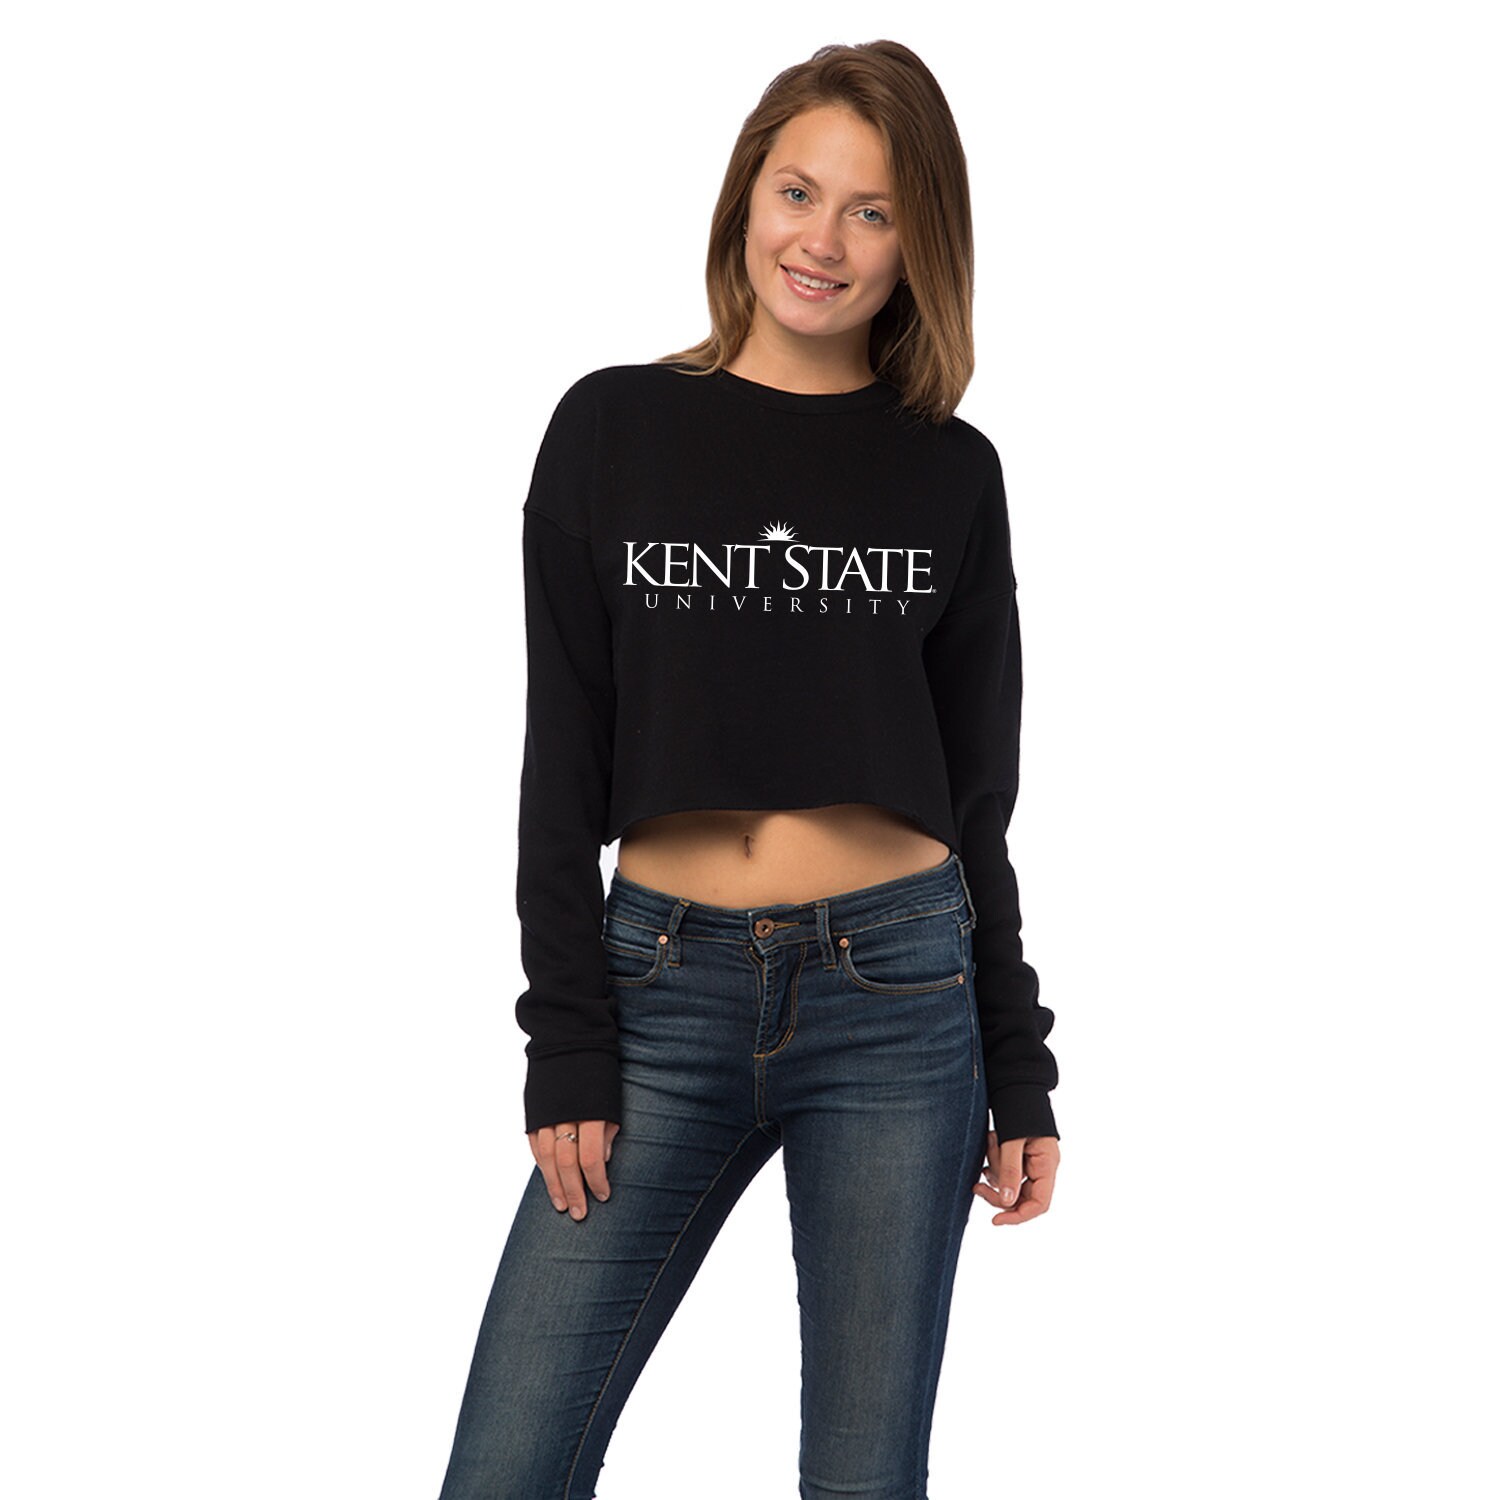 Where I'm from Apparel Retro Kent State Crew